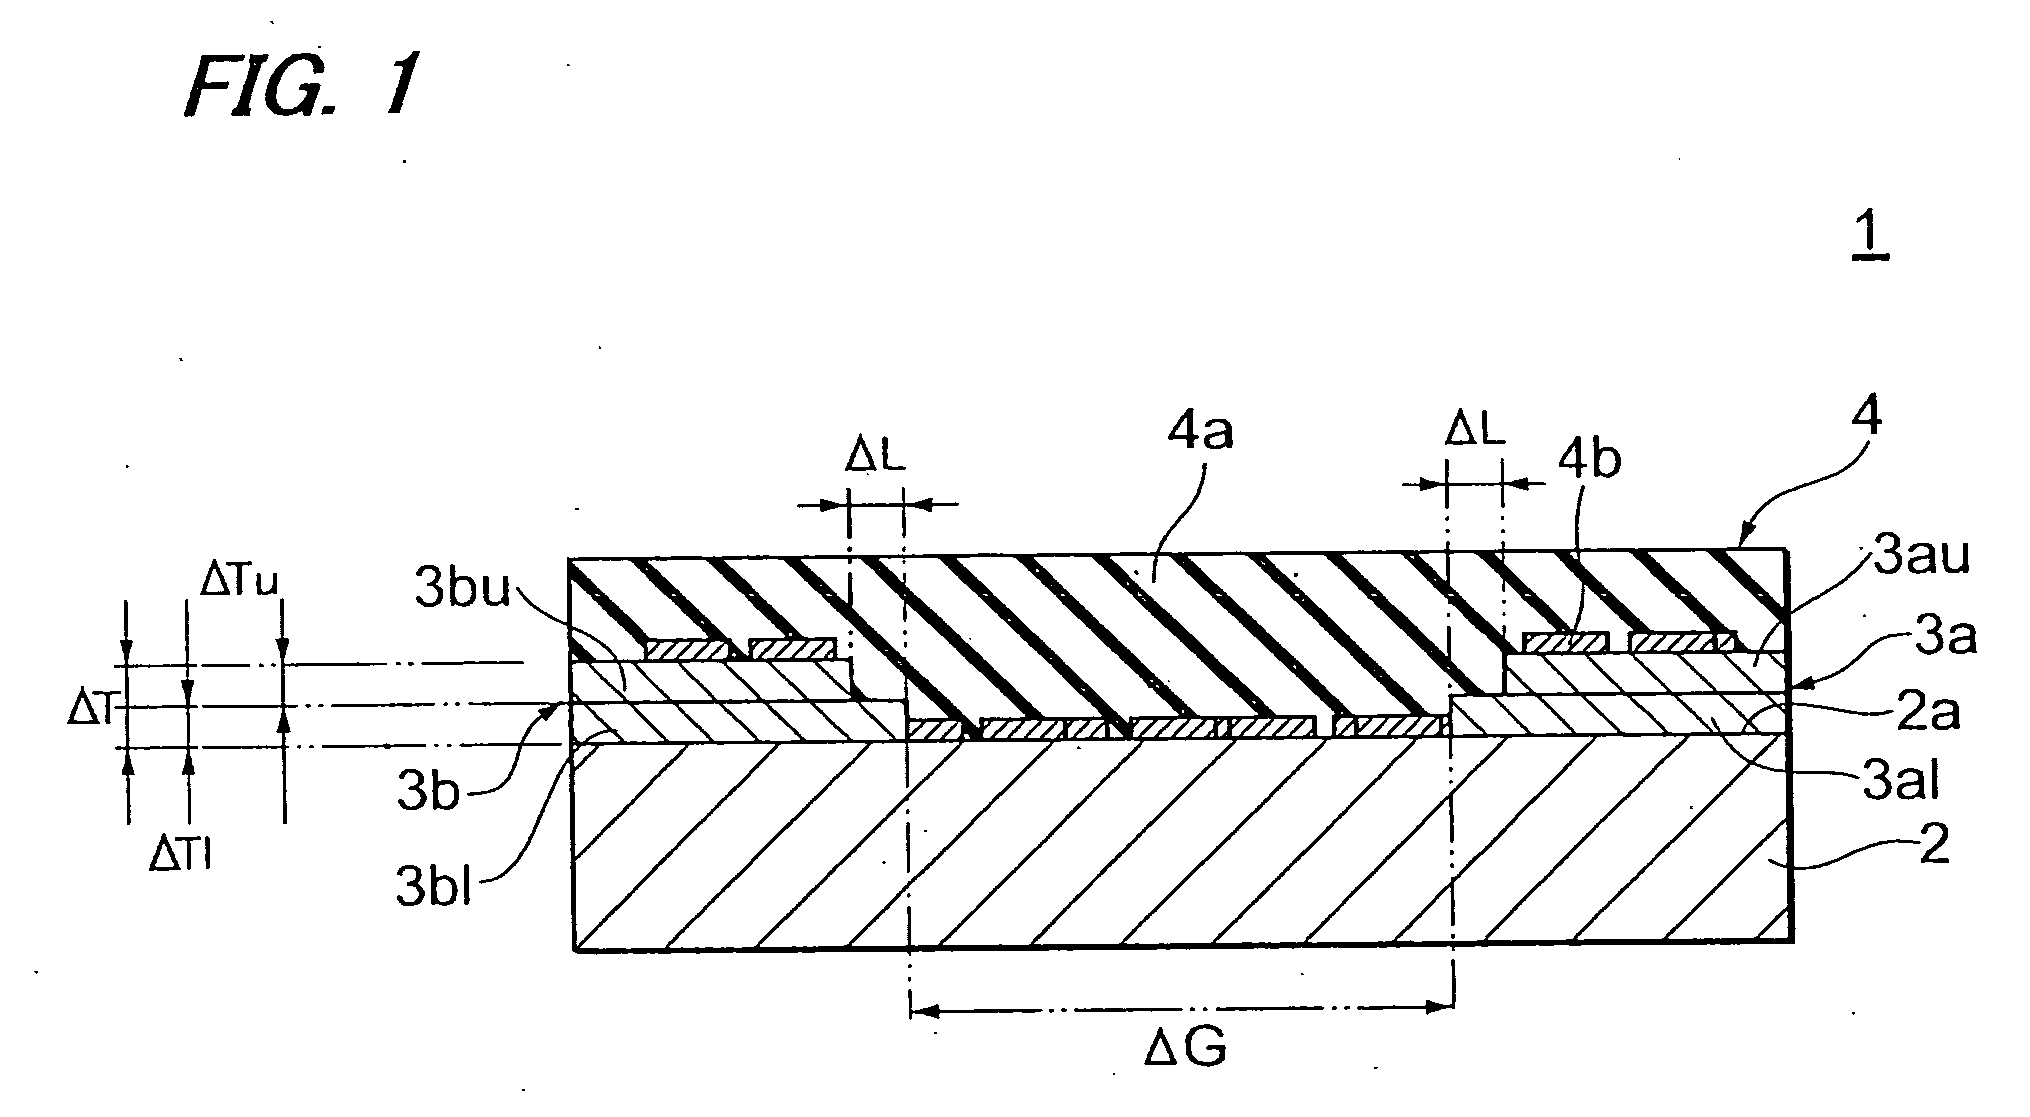 ESD protection device and composite electronic component of the same